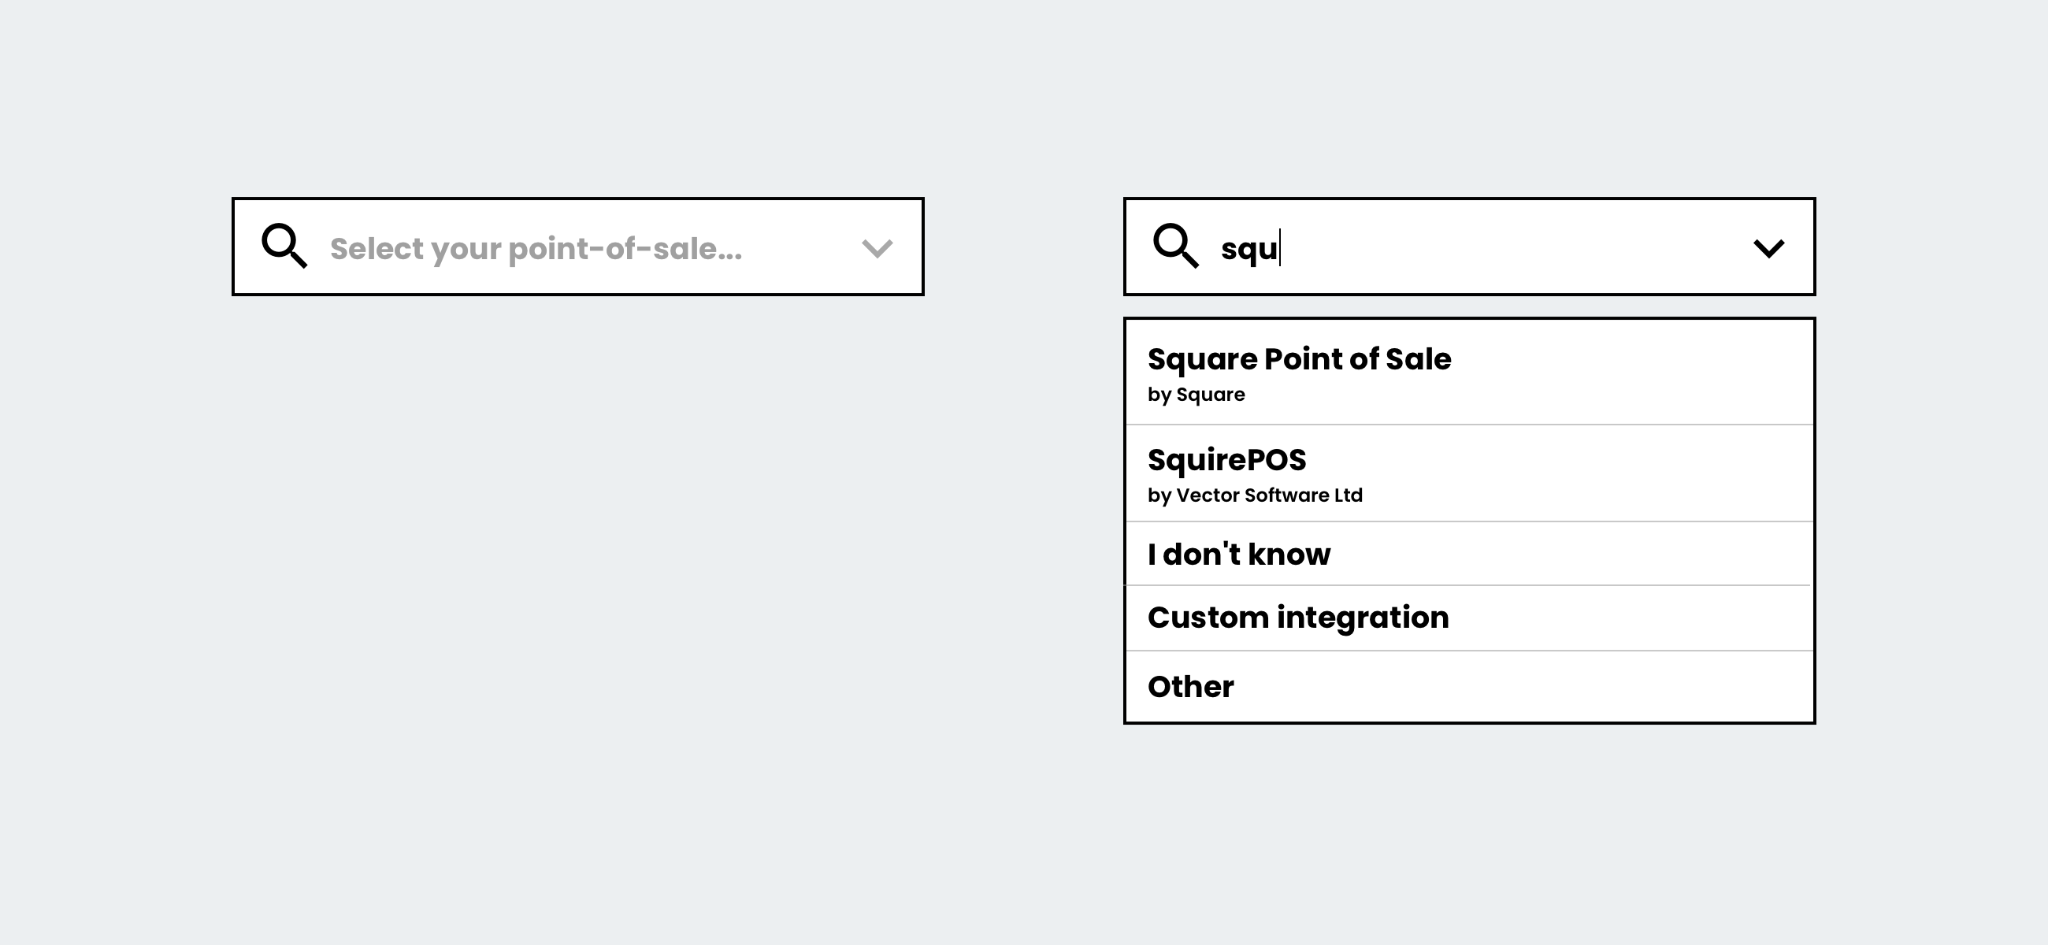 Example POS selection UI